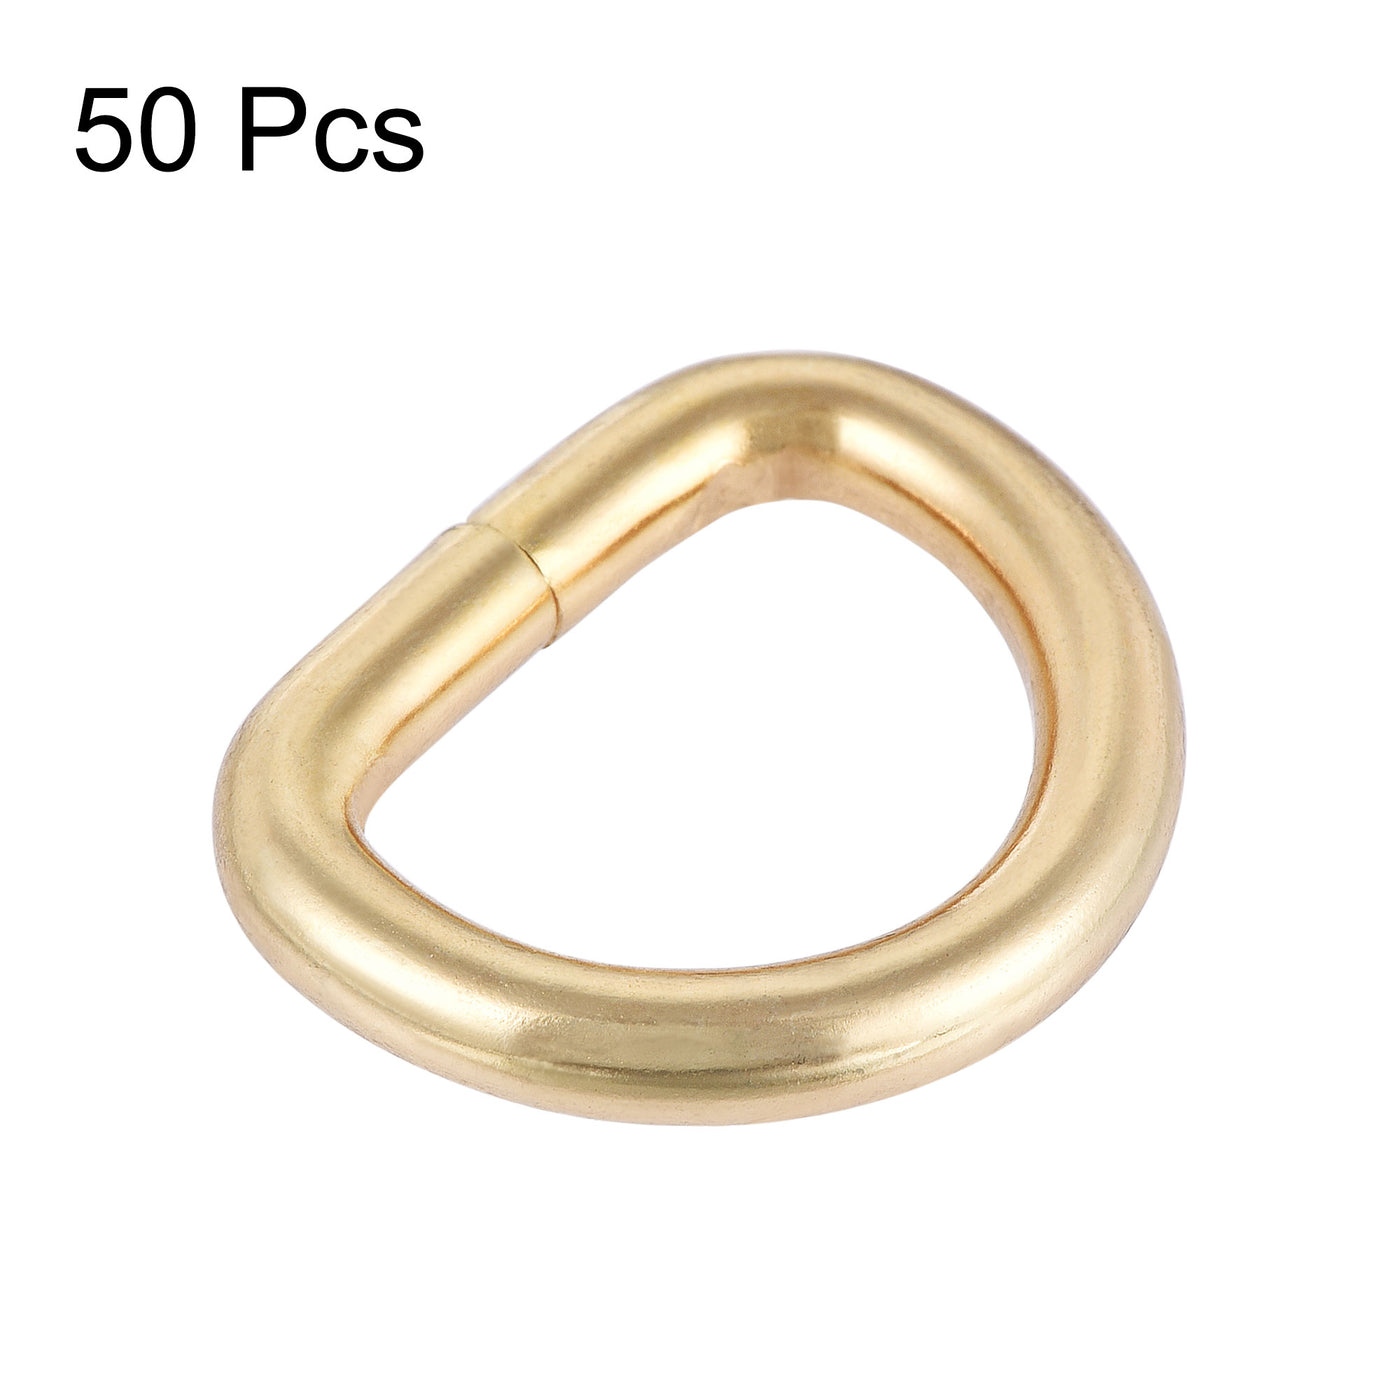 uxcell Uxcell Metal D Ring 0.63"(16mm) D-Rings Buckle for Hardware Bags Belts Craft DIY Accessories Gold Tone 50pcs